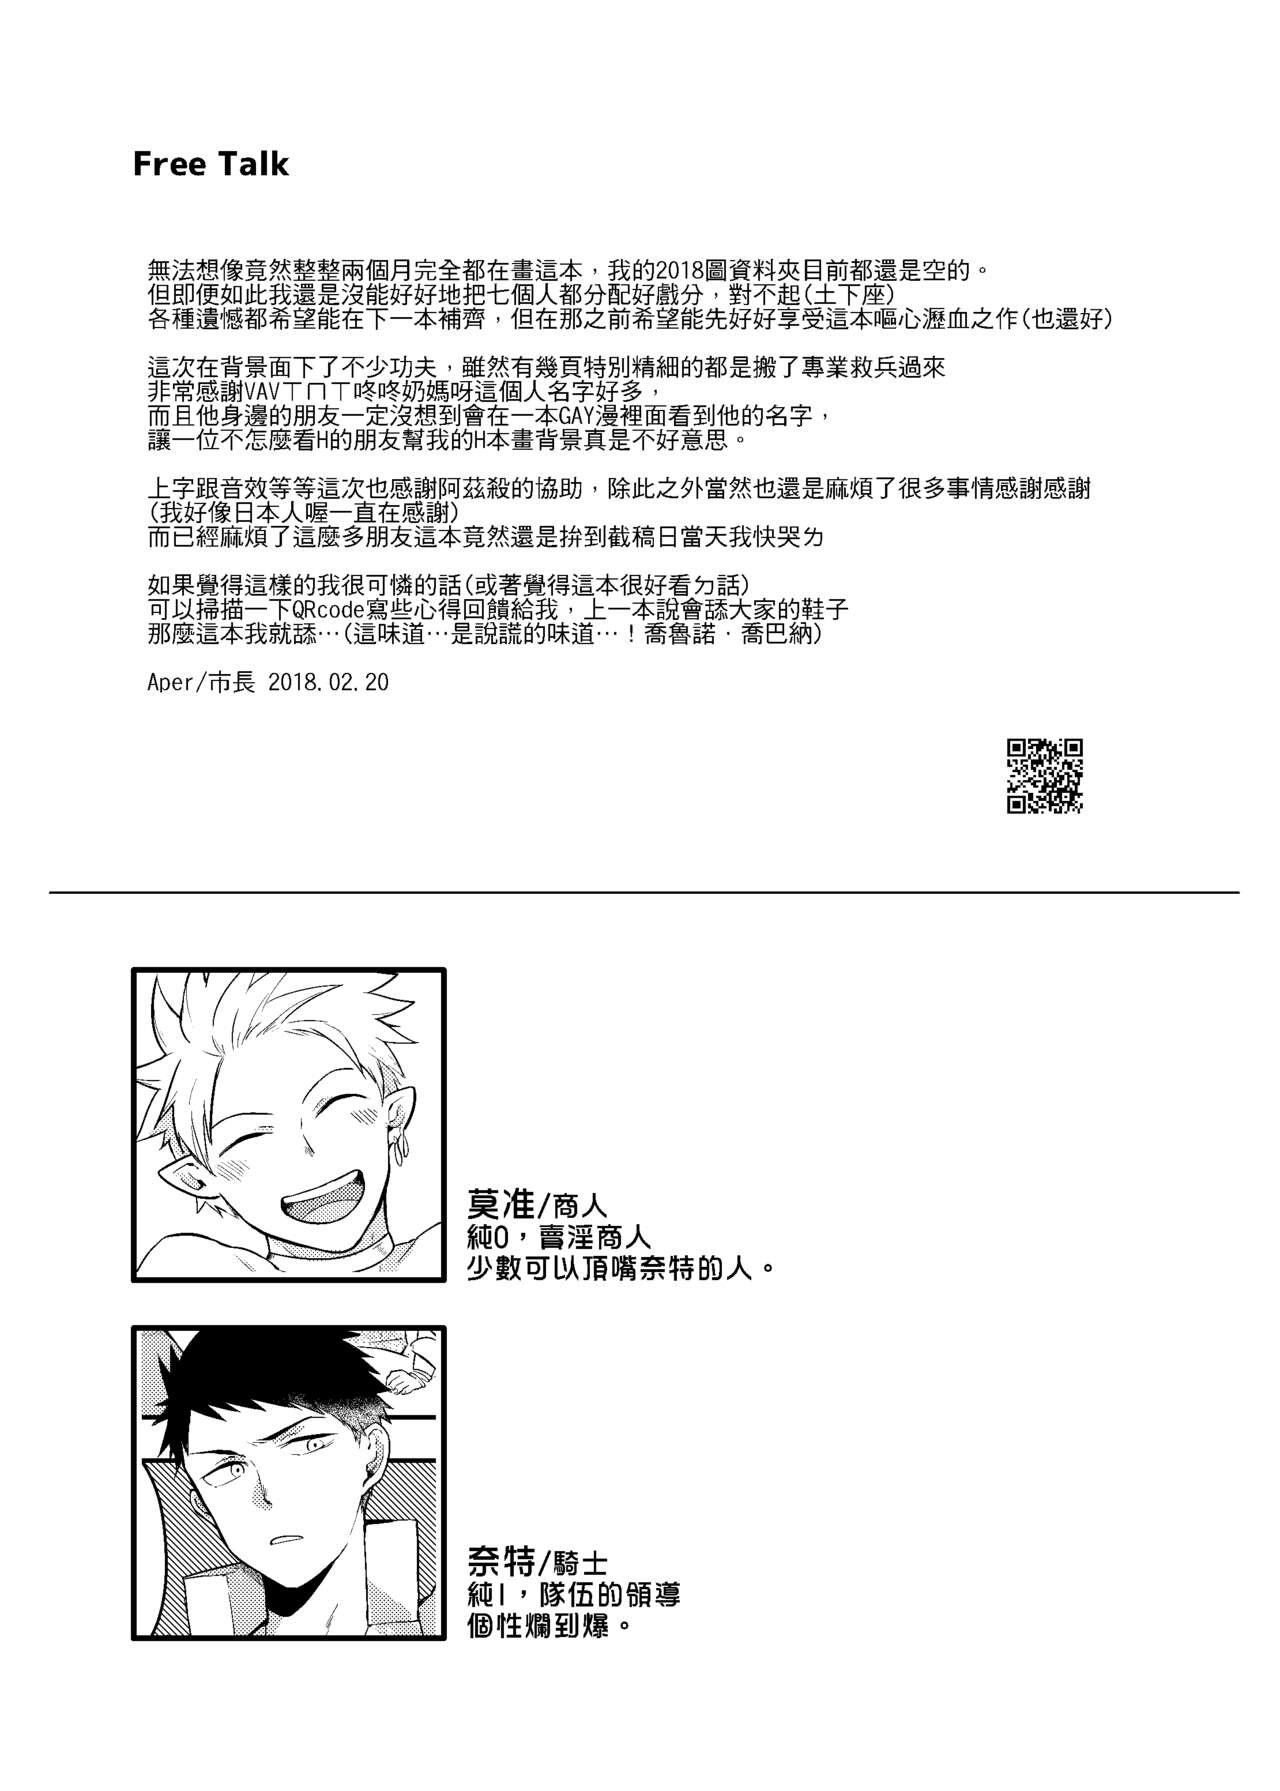 [Ho!e In One (APer)] One Knight Stand [Chinese] [Decensored] [Digital] [一桿進洞 (APer)] One Knight Stand [中国語] [無修正] [DL版]